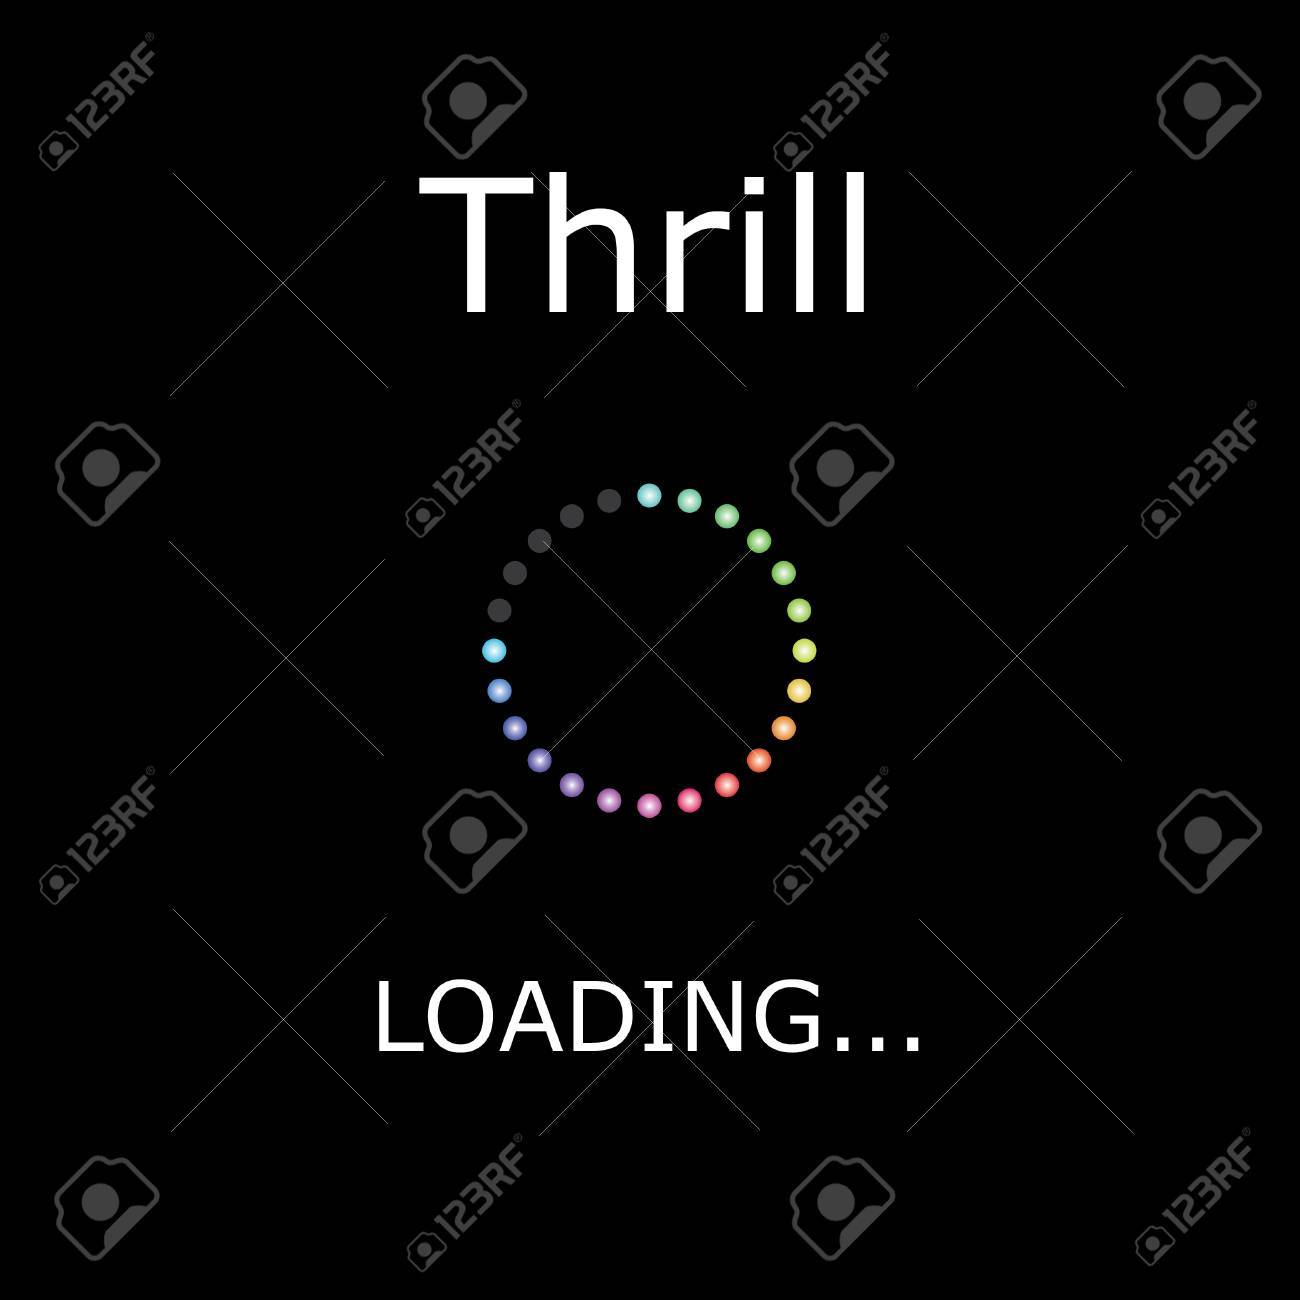 A Loading Illustration With Black Background Thrill Stock Photo